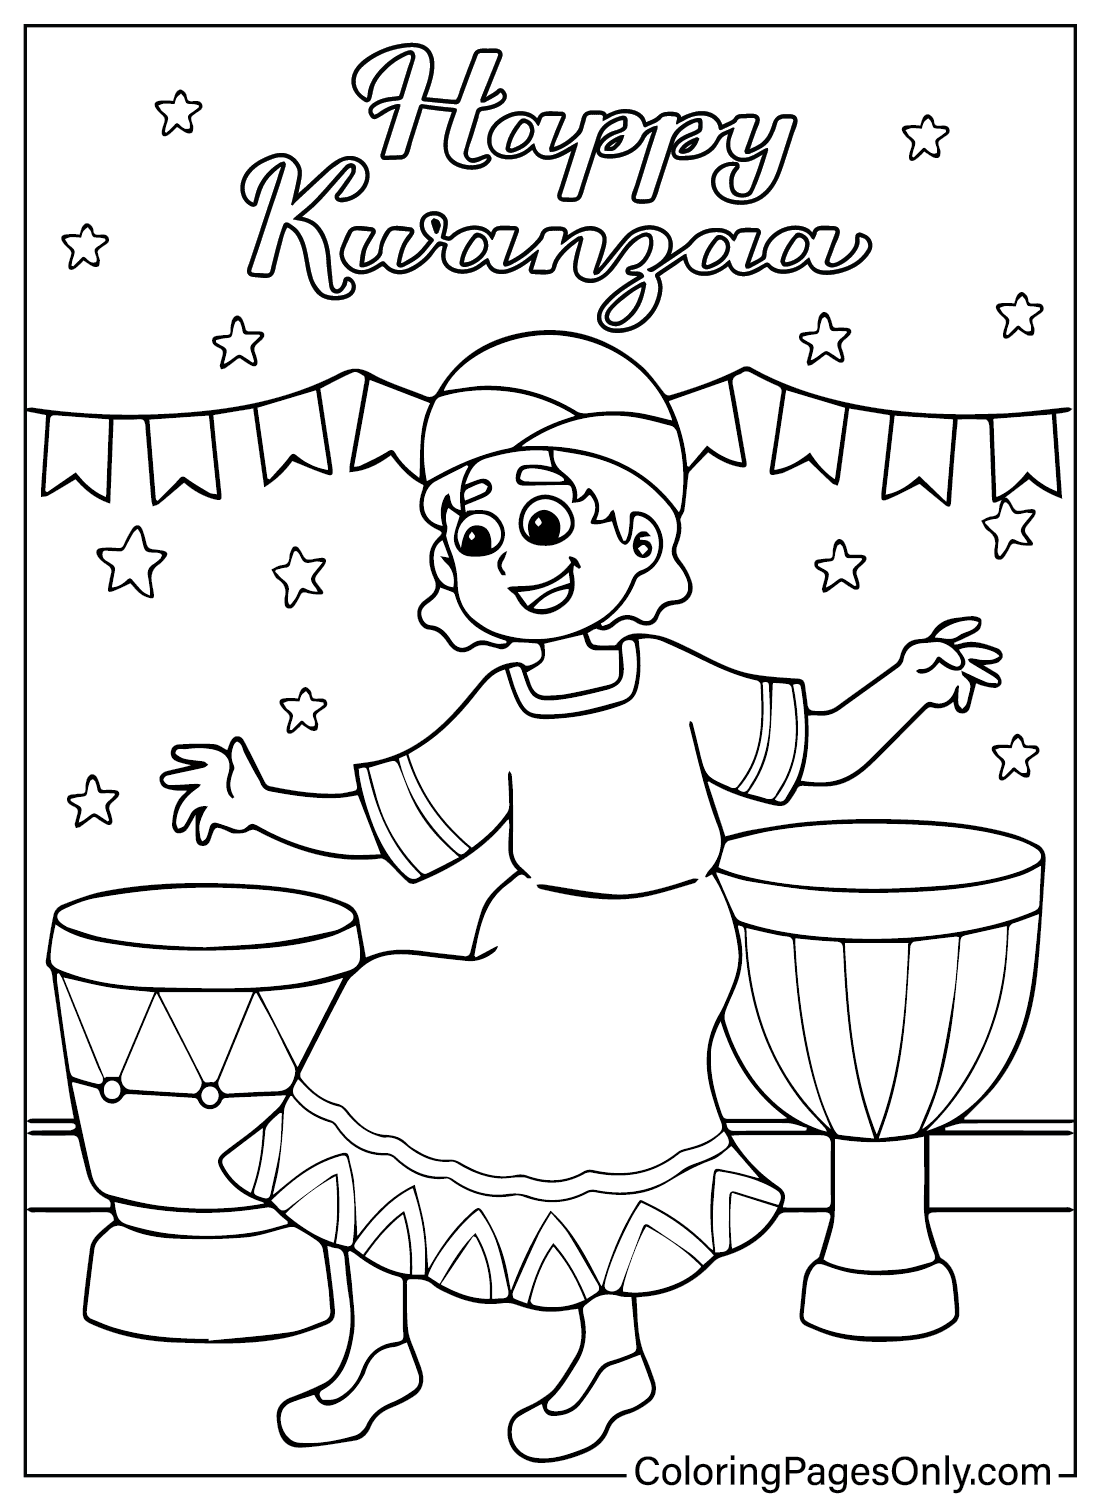 Kwanzaa Images to Color from Kwanzaa